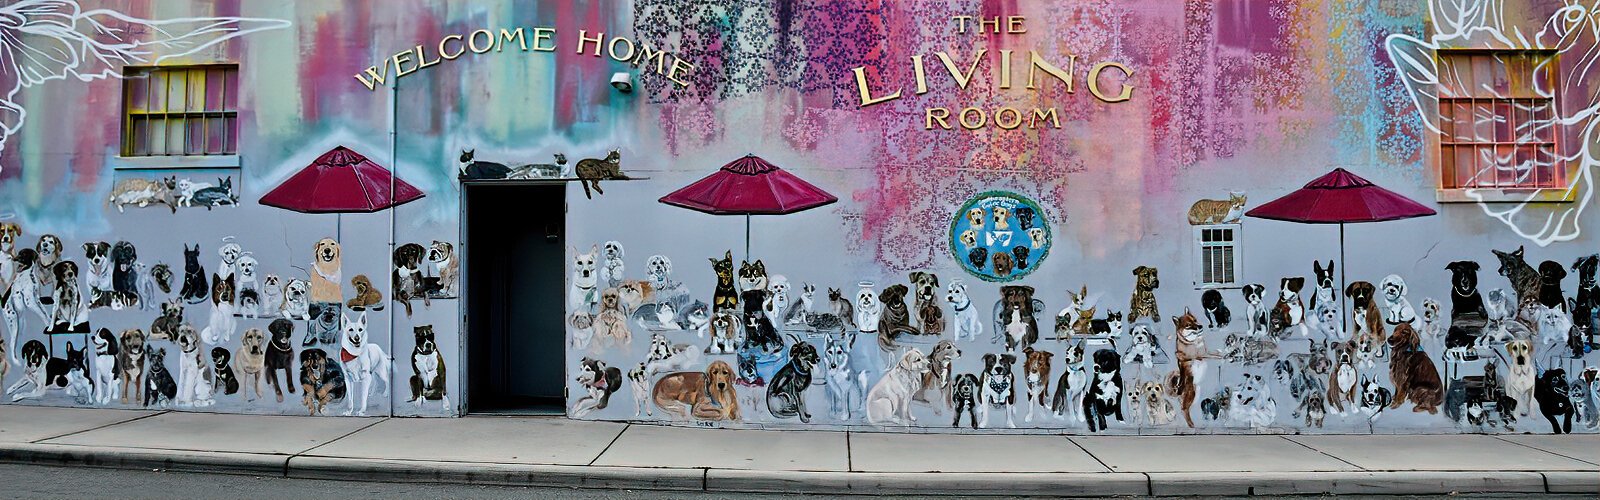 Hundreds of pets greet patrons on the exterior wall mural of The Living Room, a pet-friendly restaurant in Dunedin.